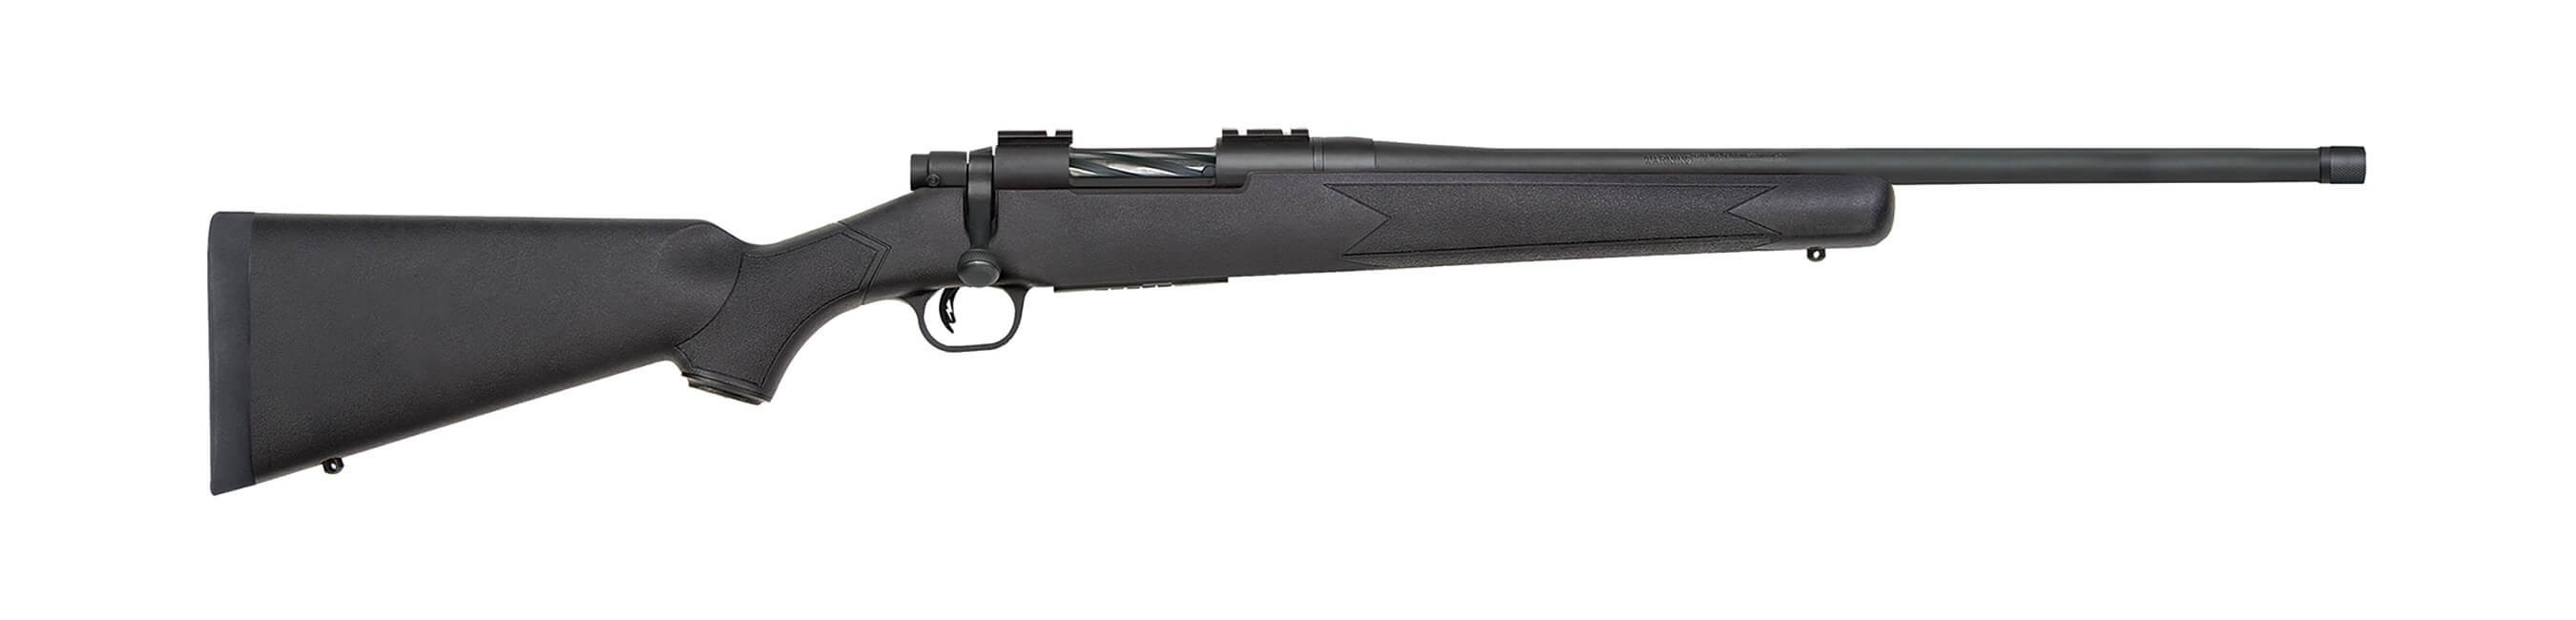 RIFLE MOSSBERG PATRIOT SYNTHETIC CALIBRE .308 WIN